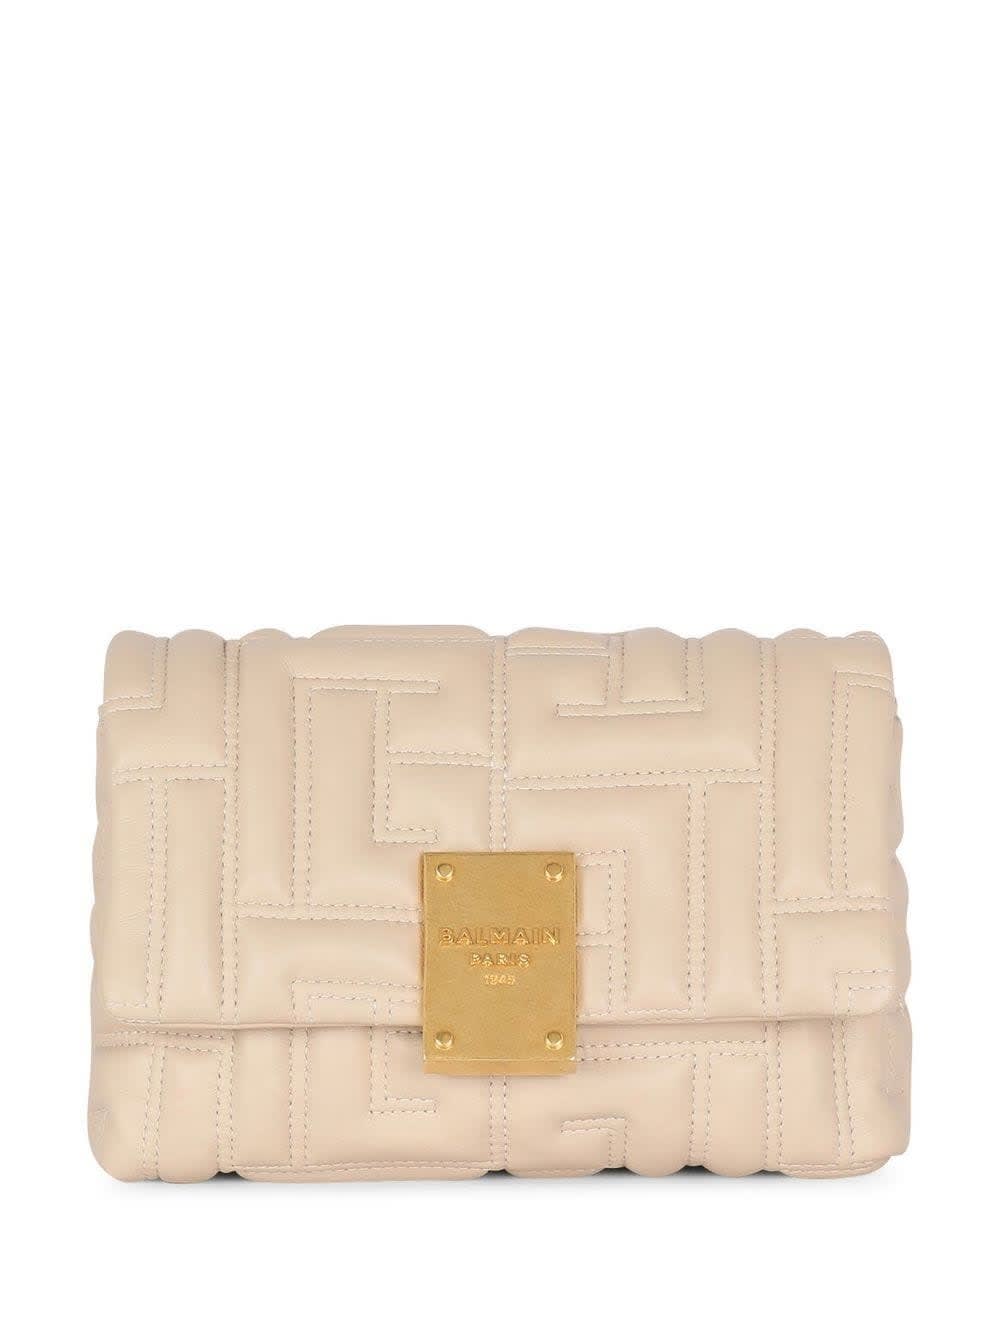 BALMAIN 1945 SOFT MINI BAG IN BEIGE QUILTED LEATHER